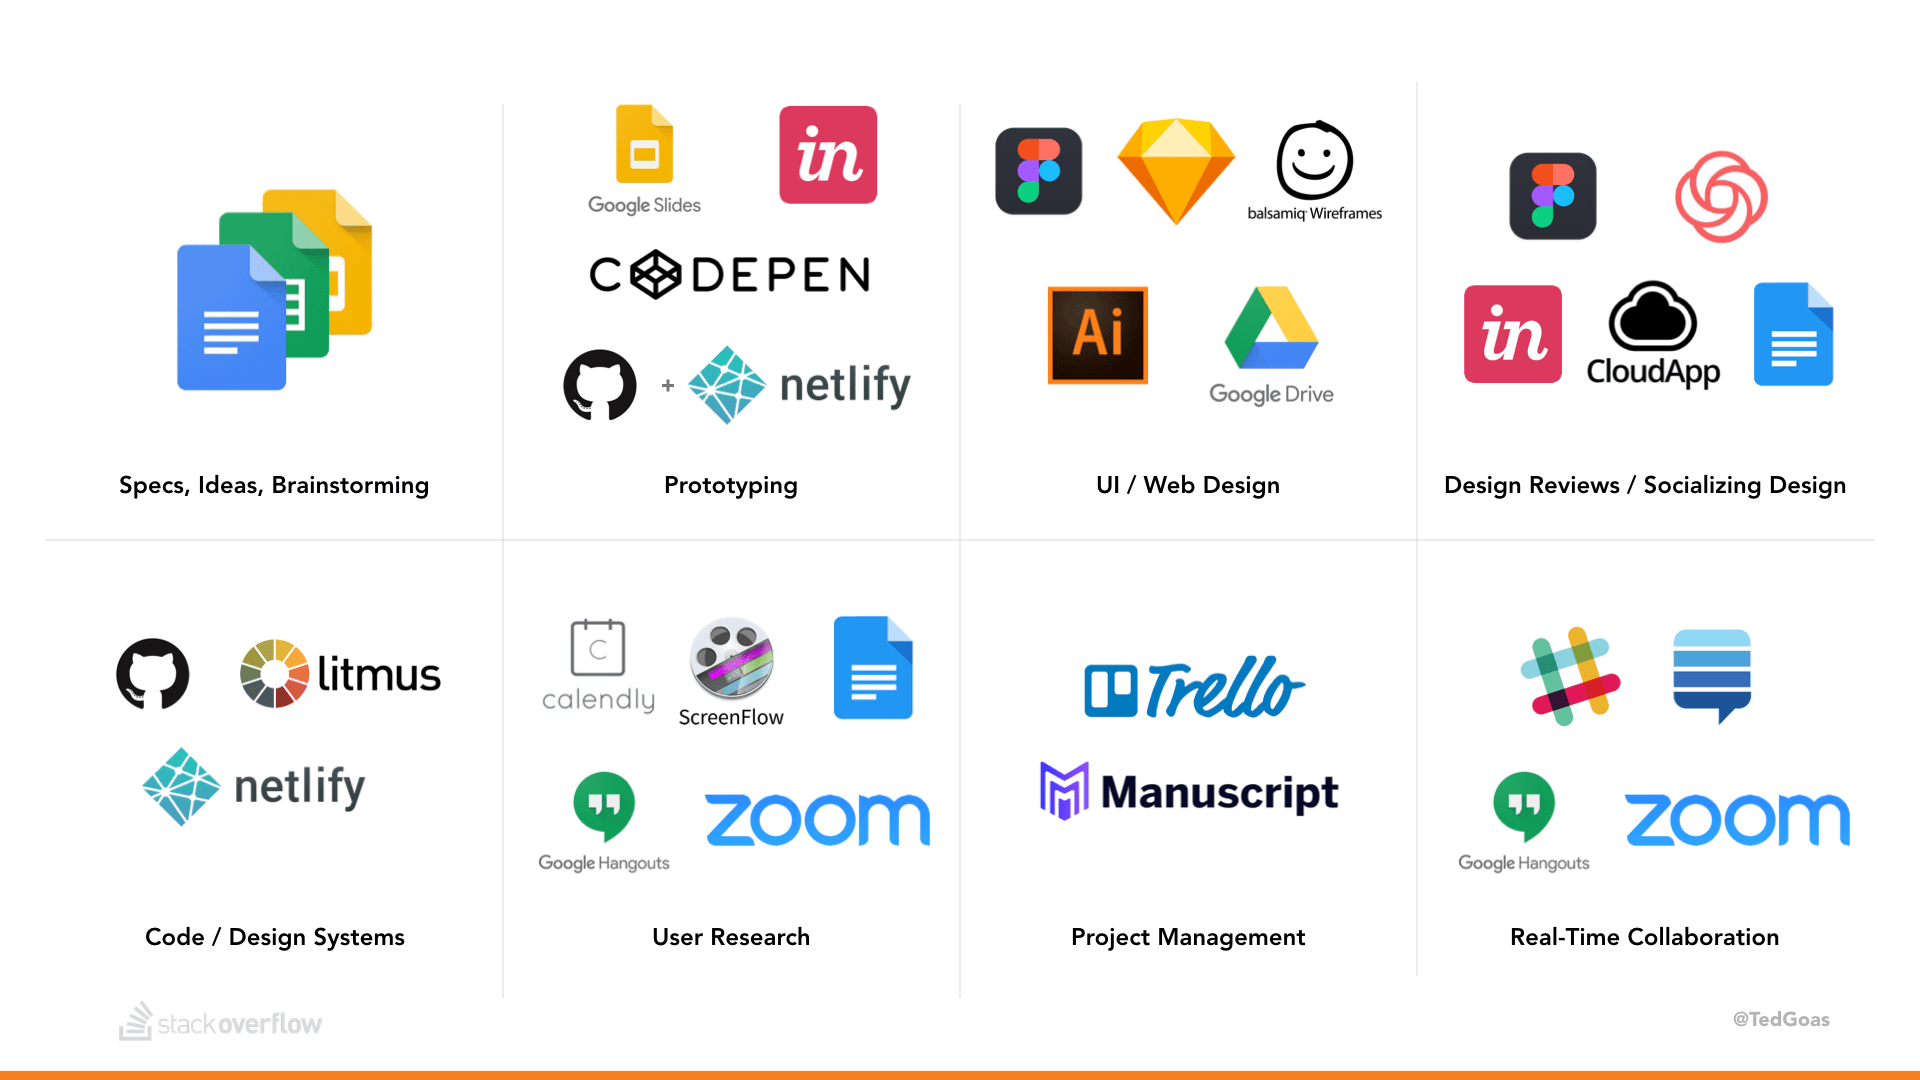 Logos for tools we use for specs, brainstorming, design, prototyping, design reviews, code, design systems, UX research, project managemetn, and real-time collaboration.